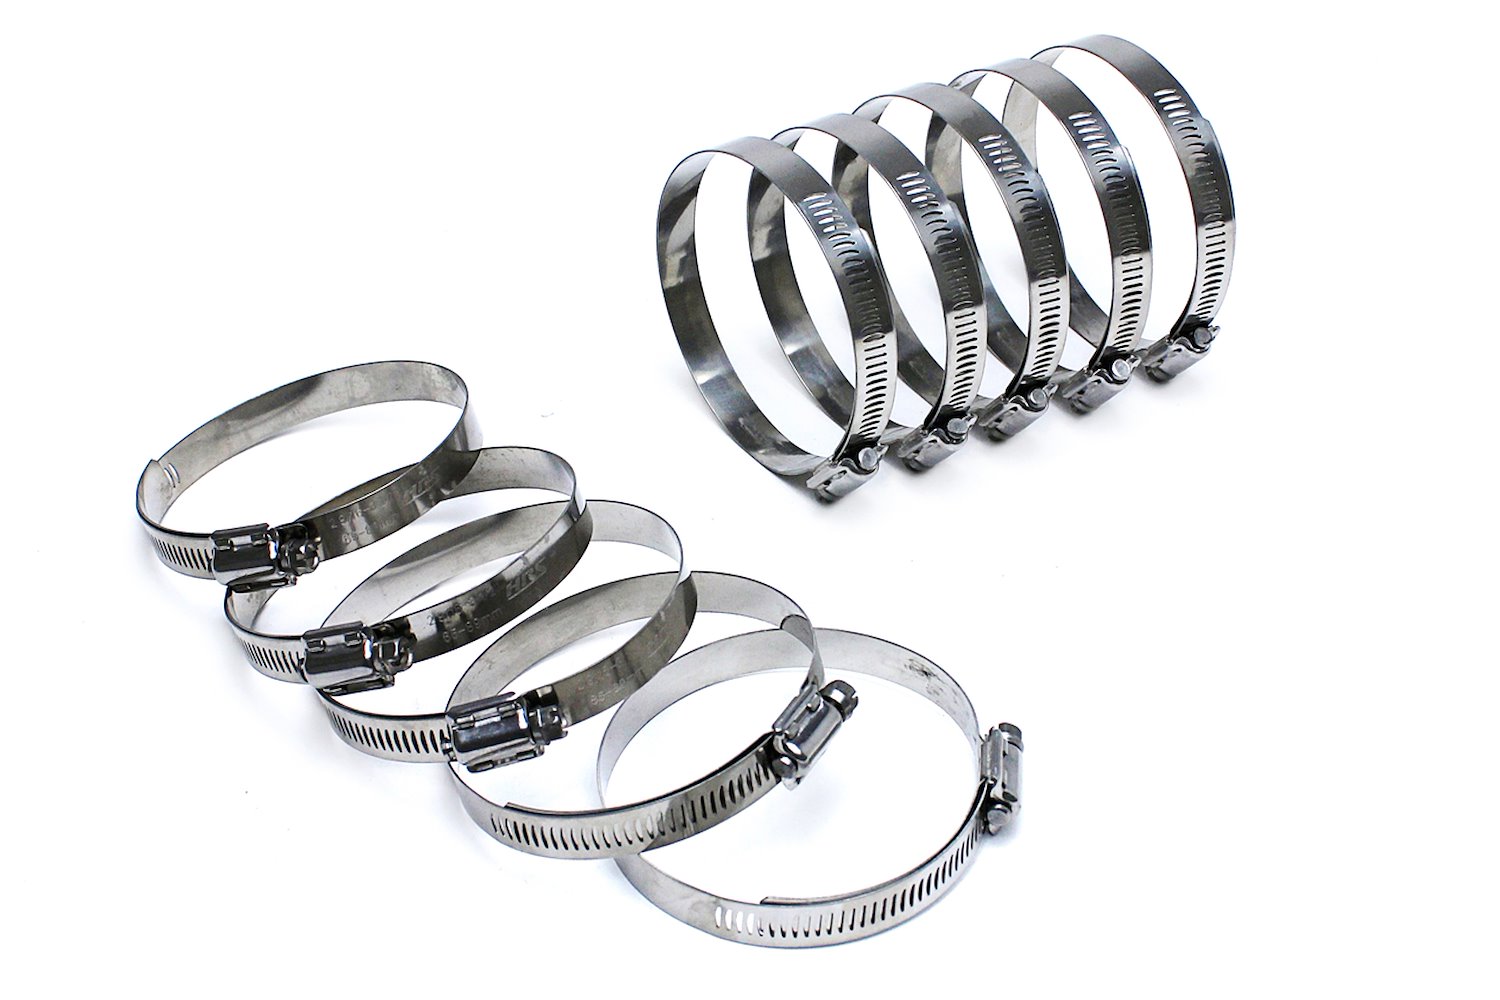 SSWC-65-89x10 Stainless Steel Worm Gear Hose Clamp, Effective Range: 2-9/16 in.- 3-1/2 in., 10Pc